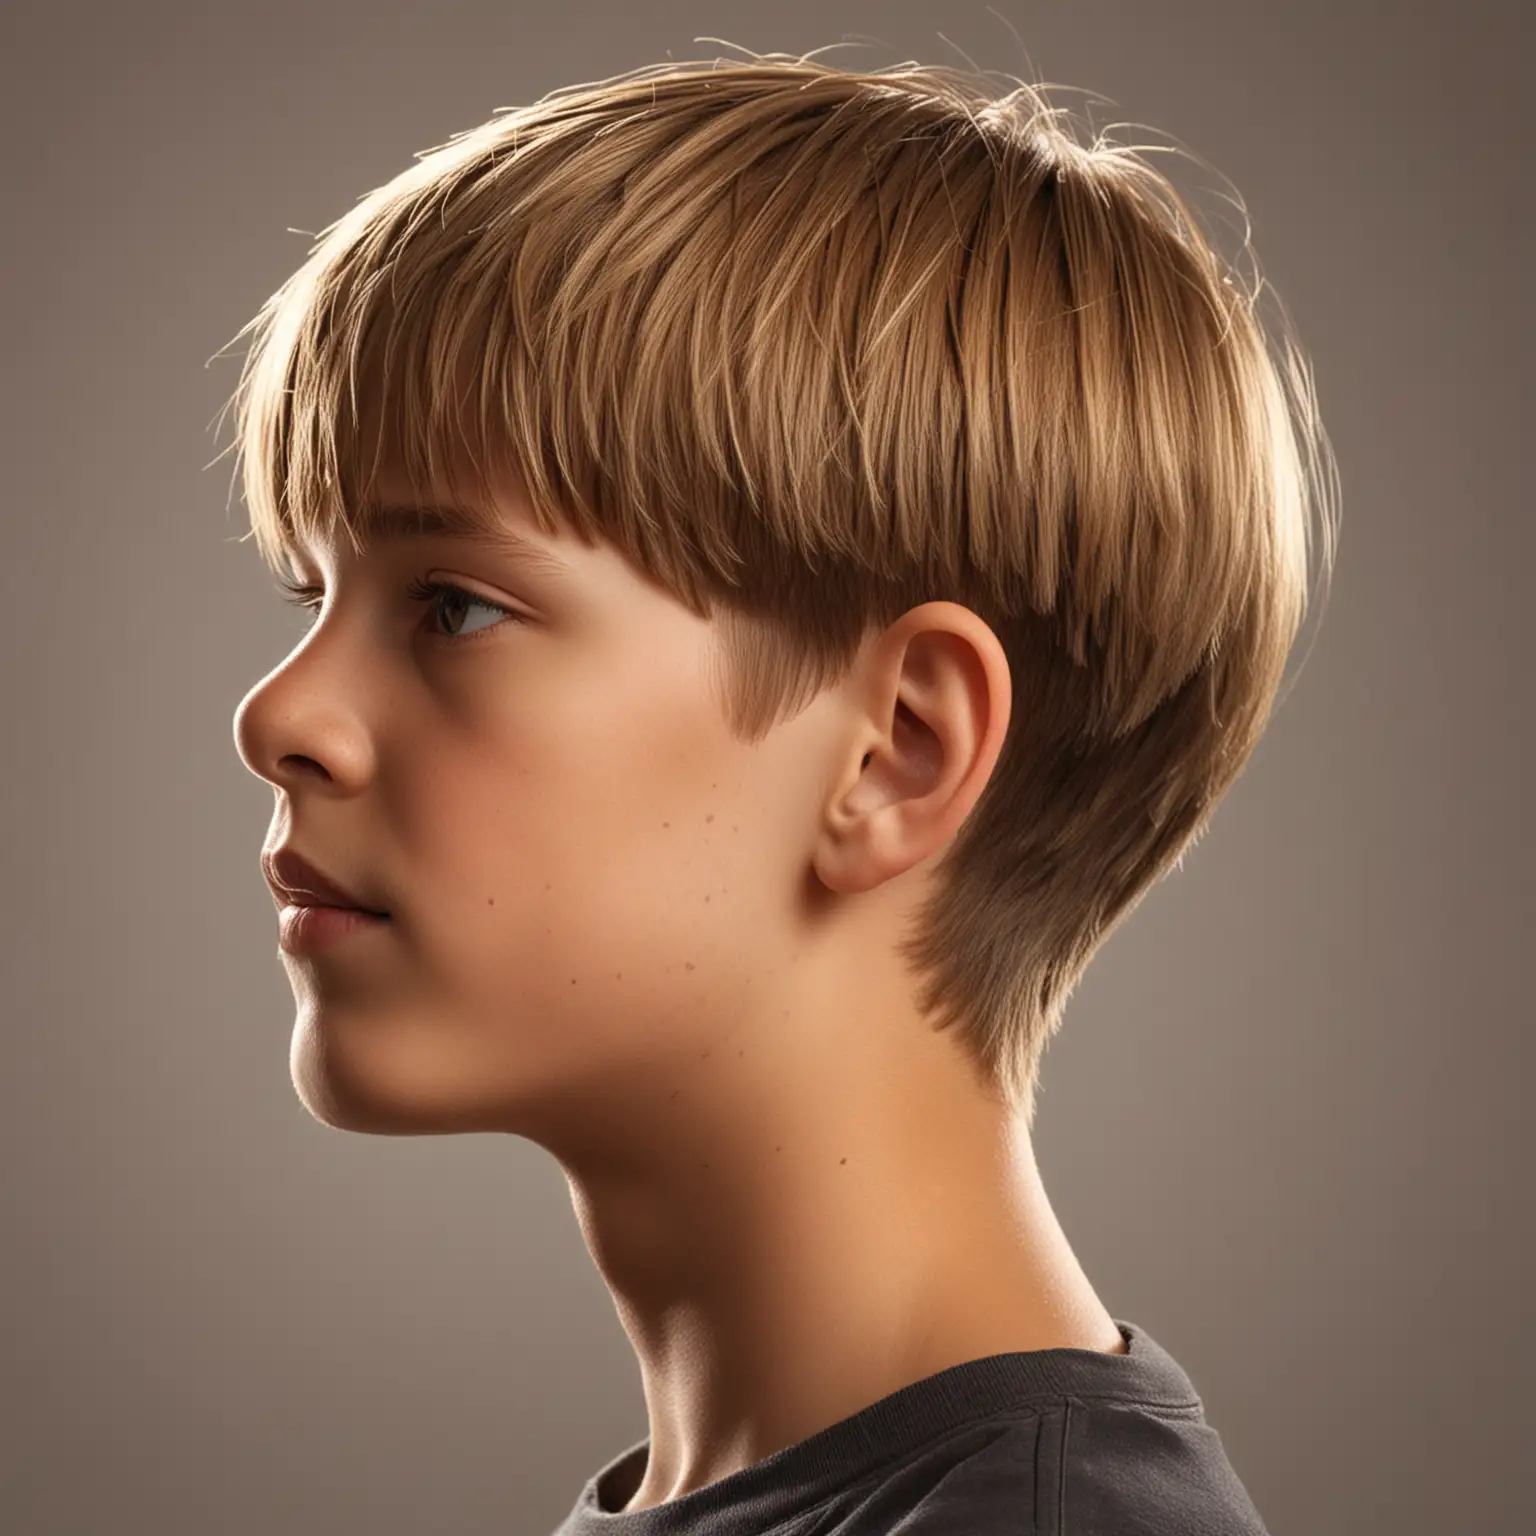 Hyper realistic, studio quality photo of  twelve year old boy with shiny hair, light brown bowl hair cut,  view from side of face, sunlight